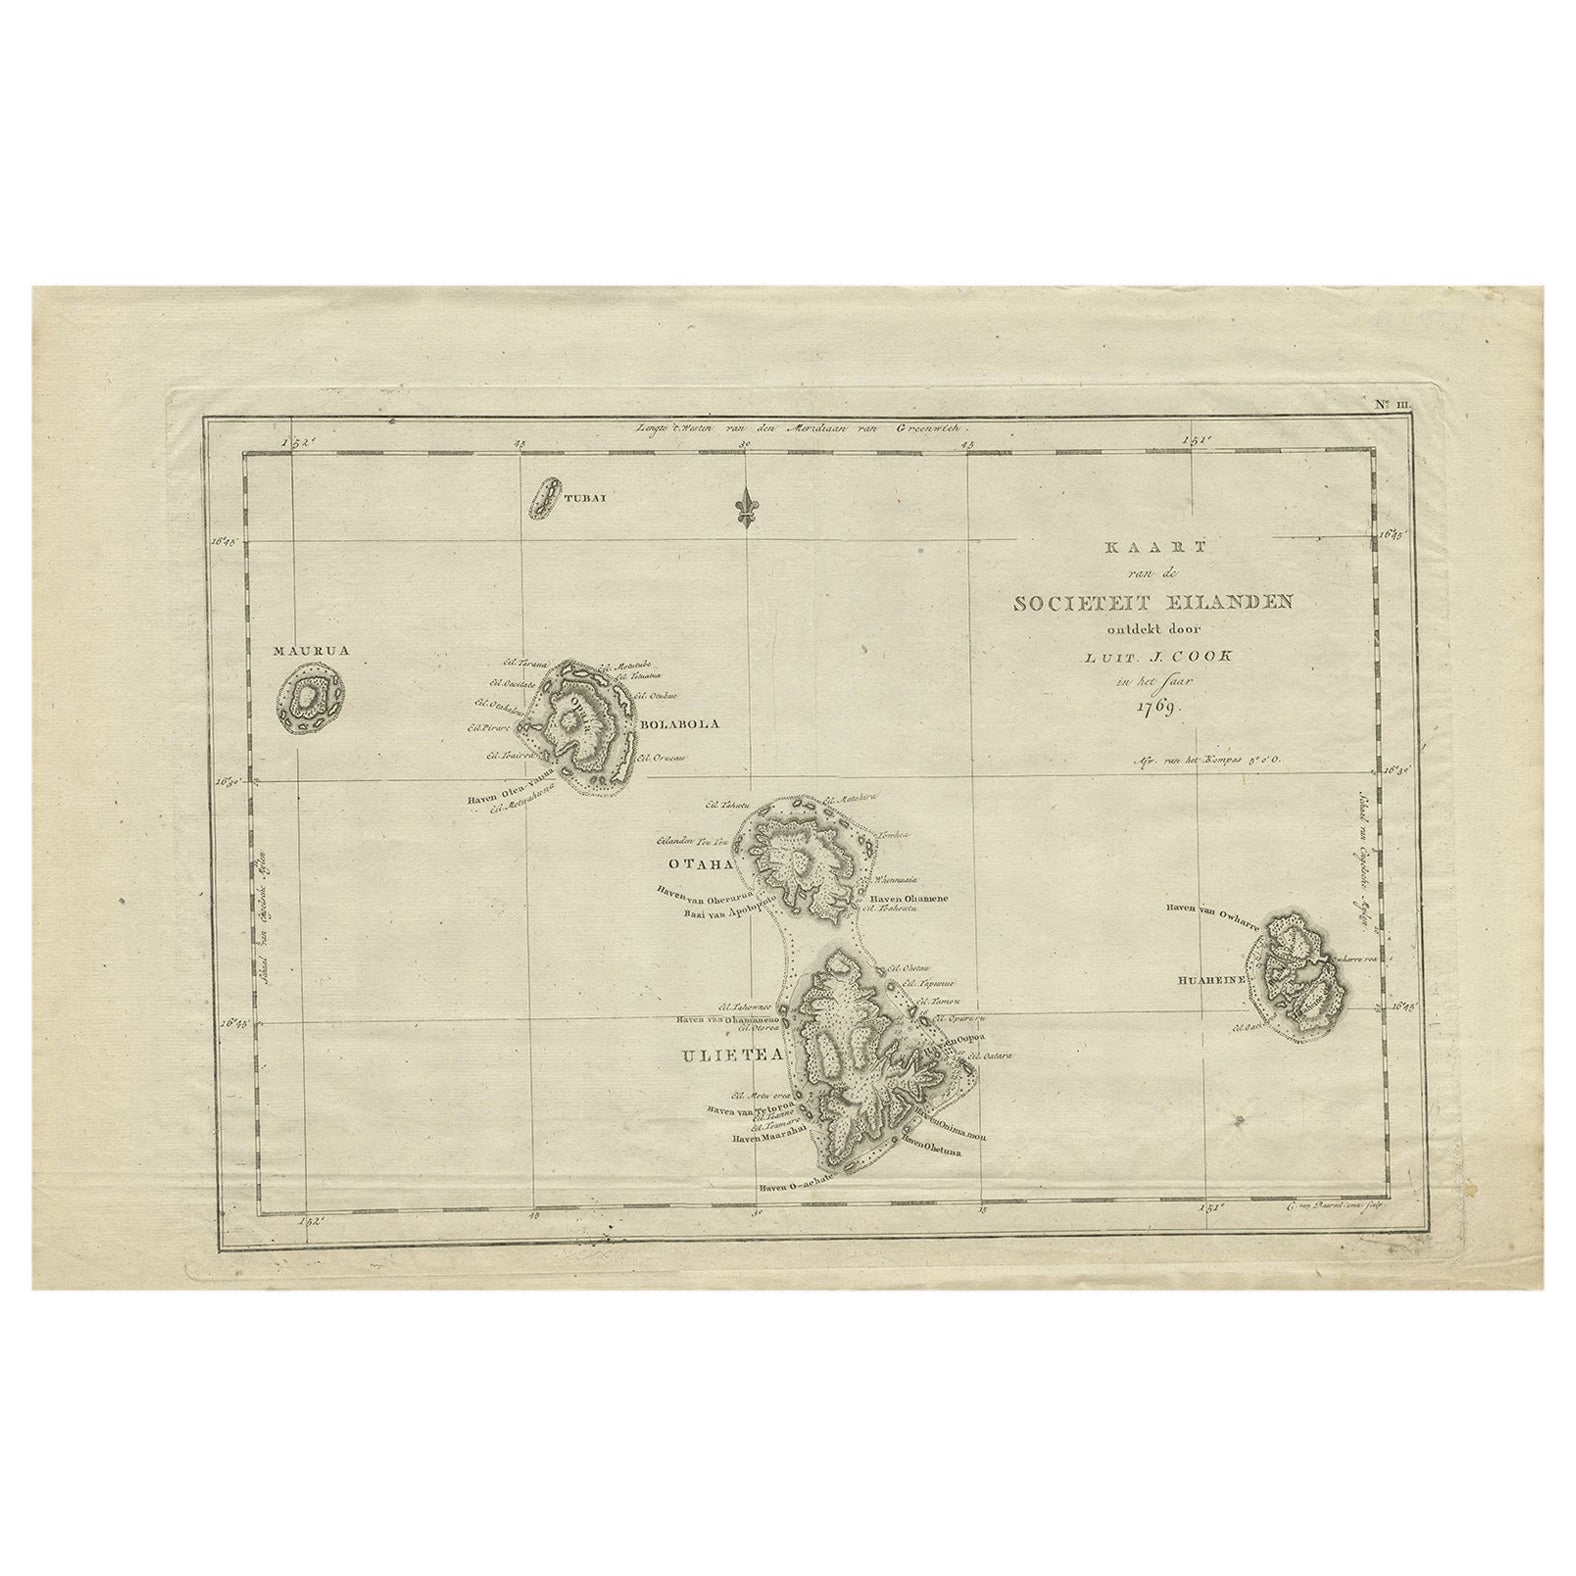 Antique Map of the Society Islands by Cook, 1803